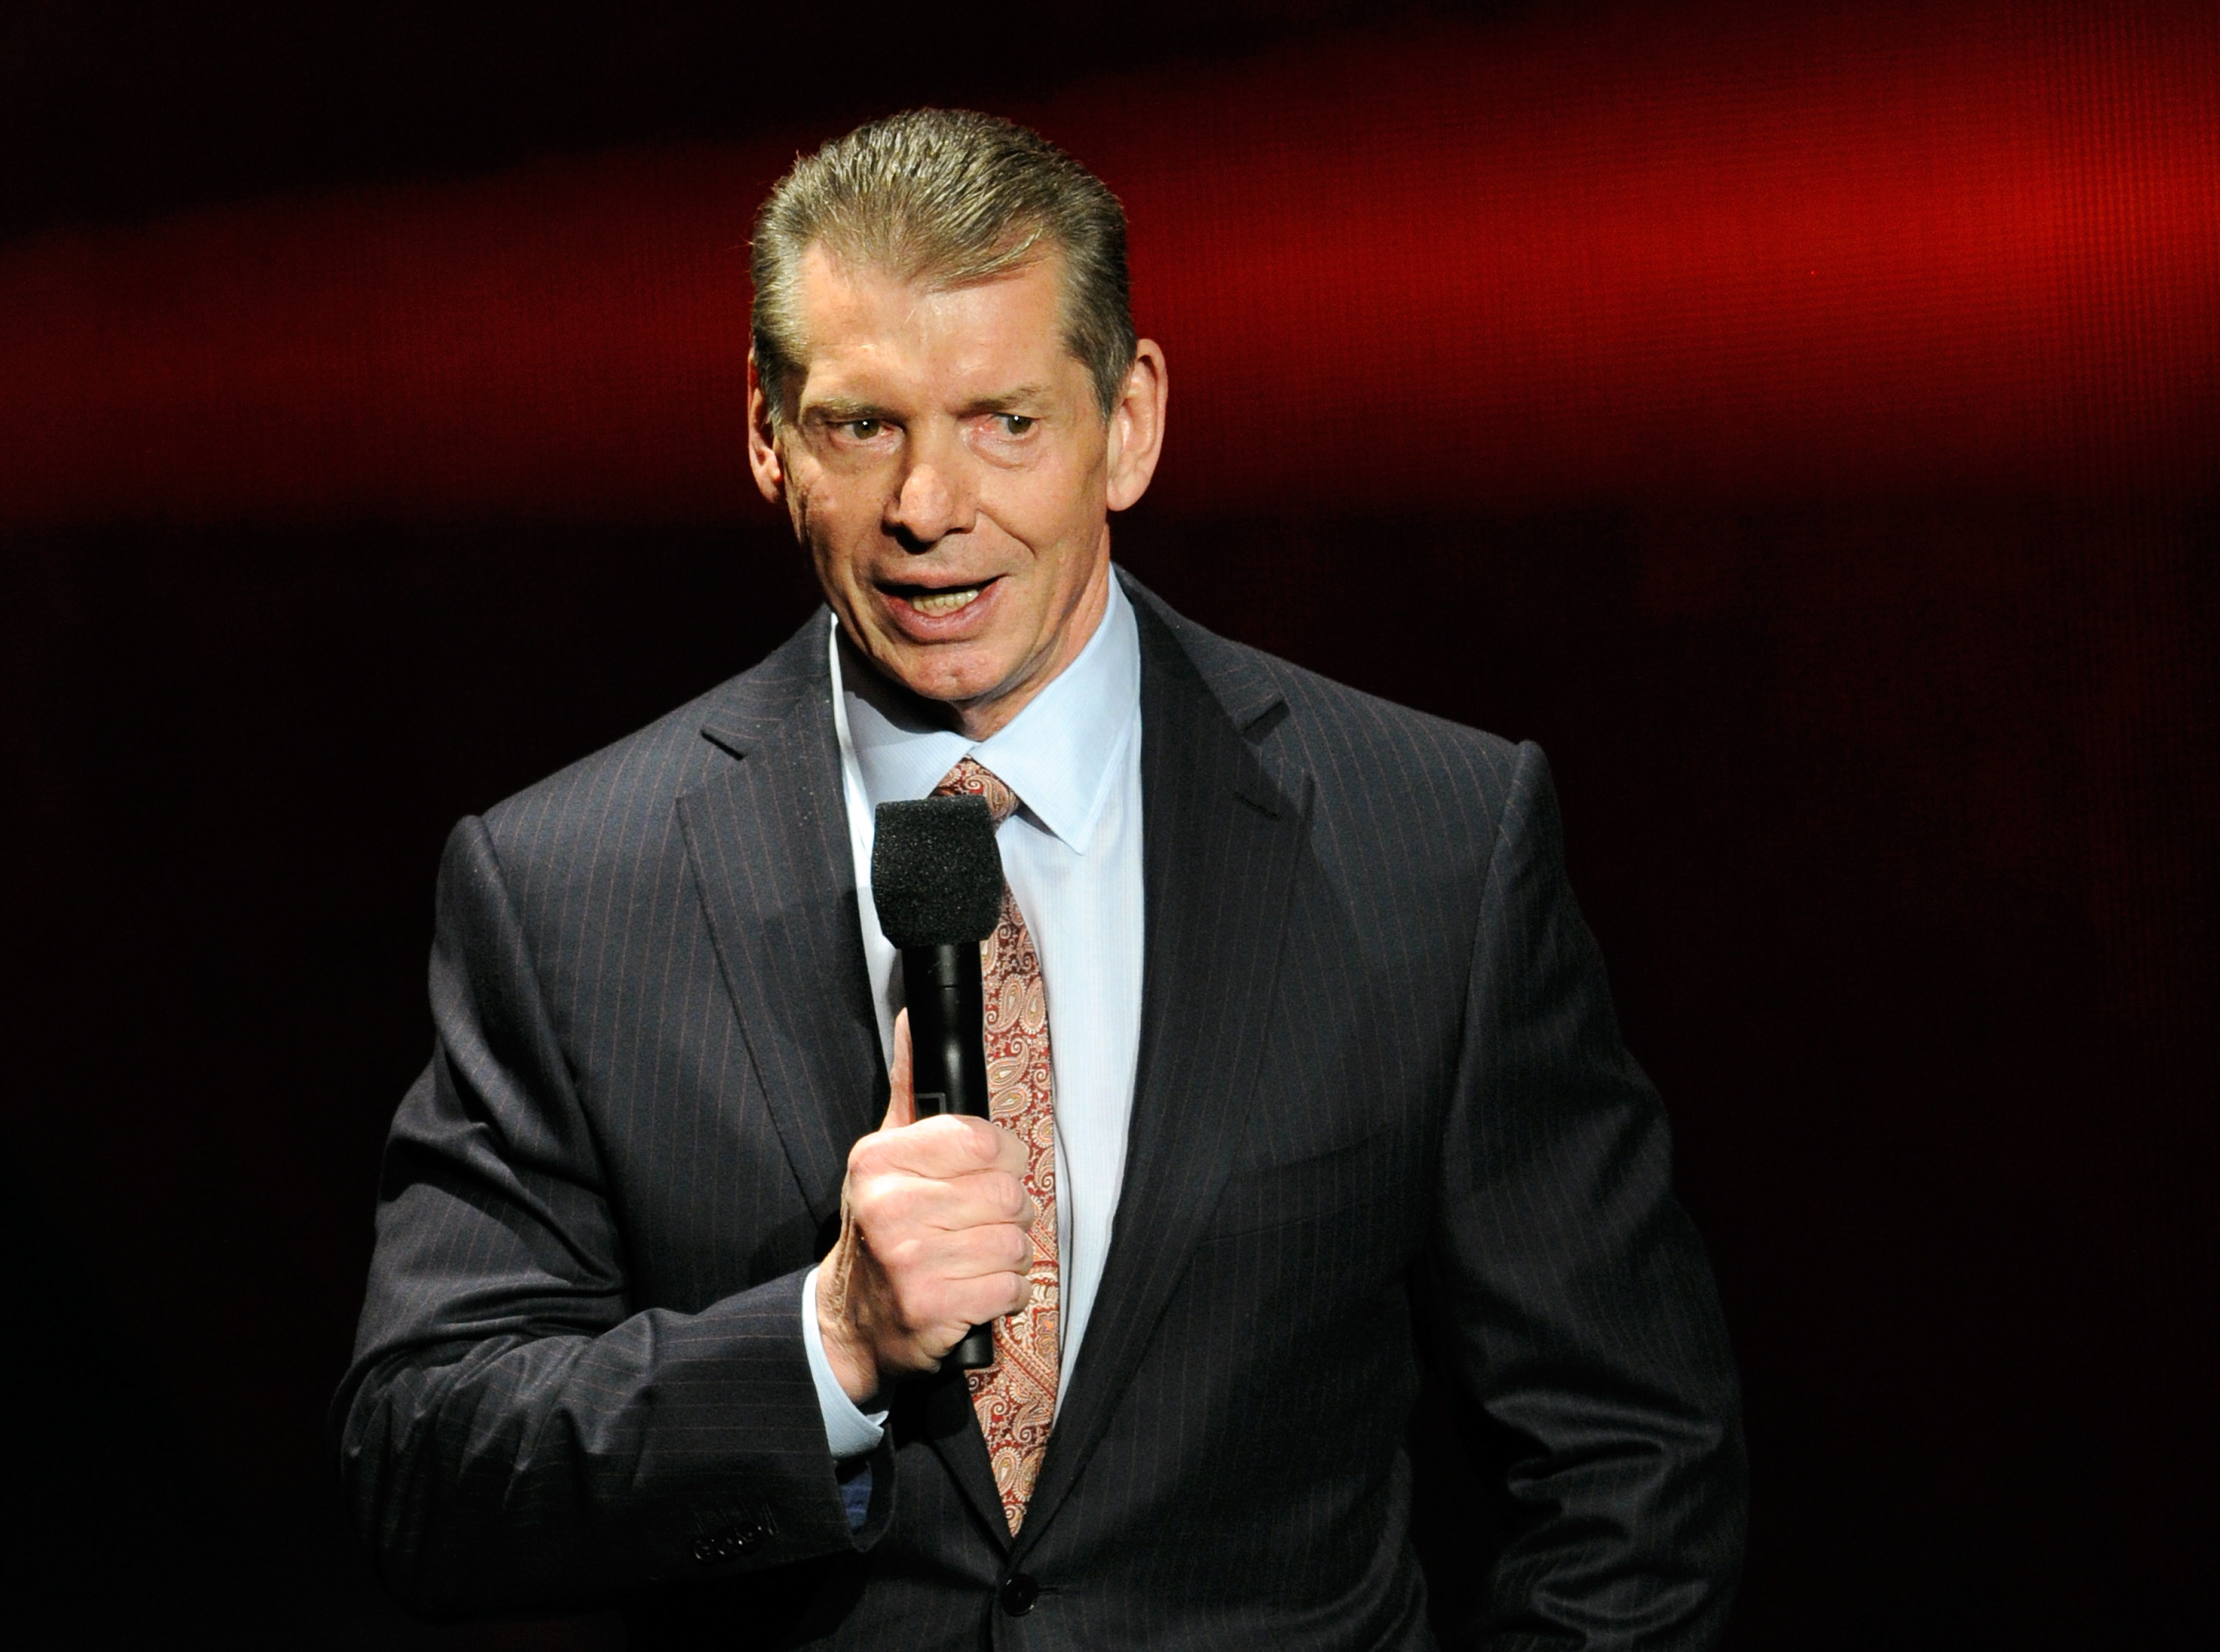 Vince McMahon To Leave WWE Amid Misconduct Allegations